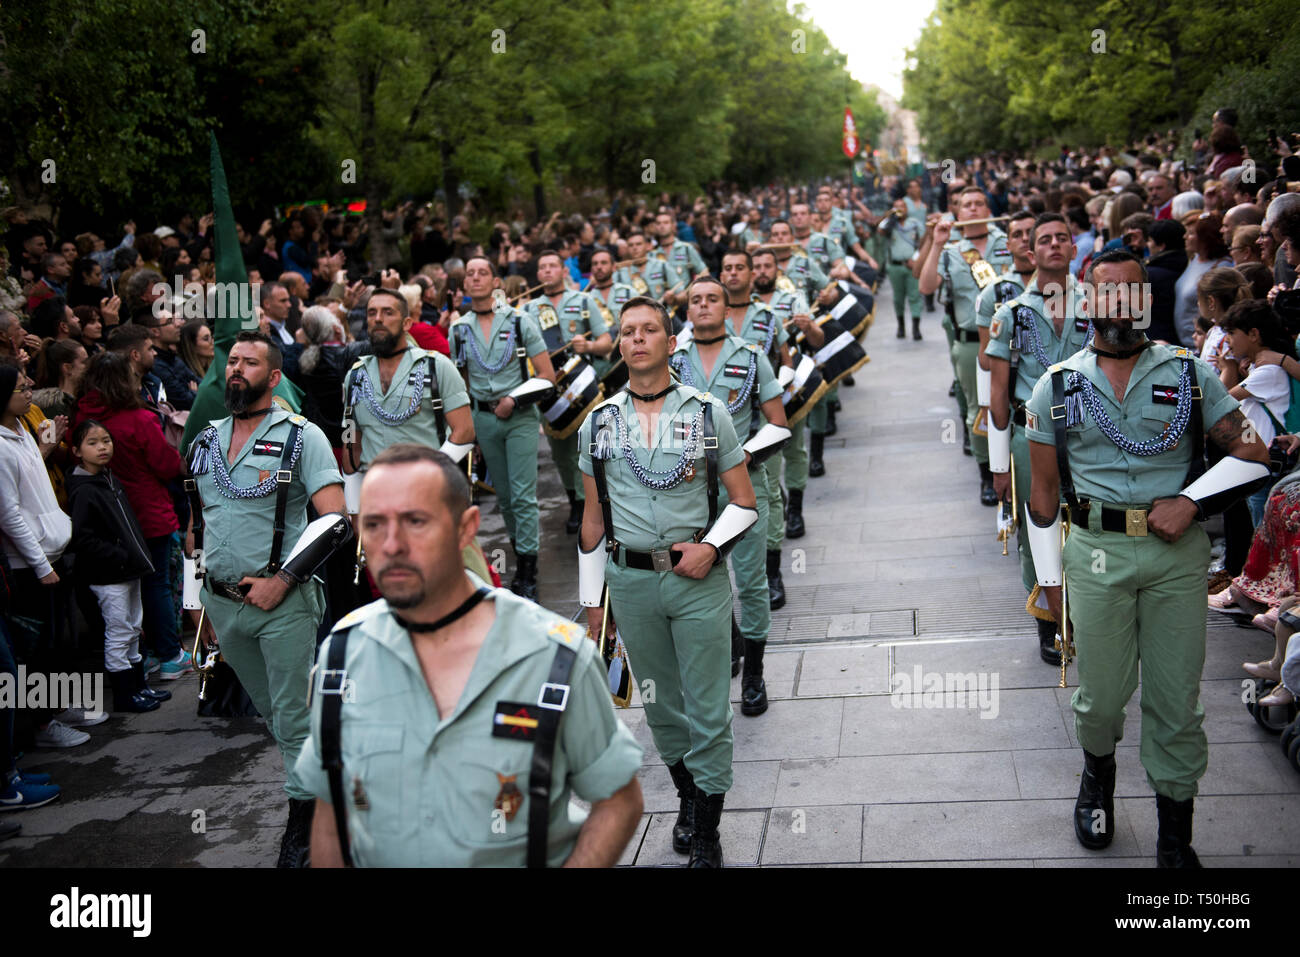 Soldiers of La Legion are seen marching during the Good Friday procession in Granada, Spain. Every year thousands of christians believers celebrates the Holy Week of Easter with the crucifixion and resurrection of Jesus Christ. Stock Photo